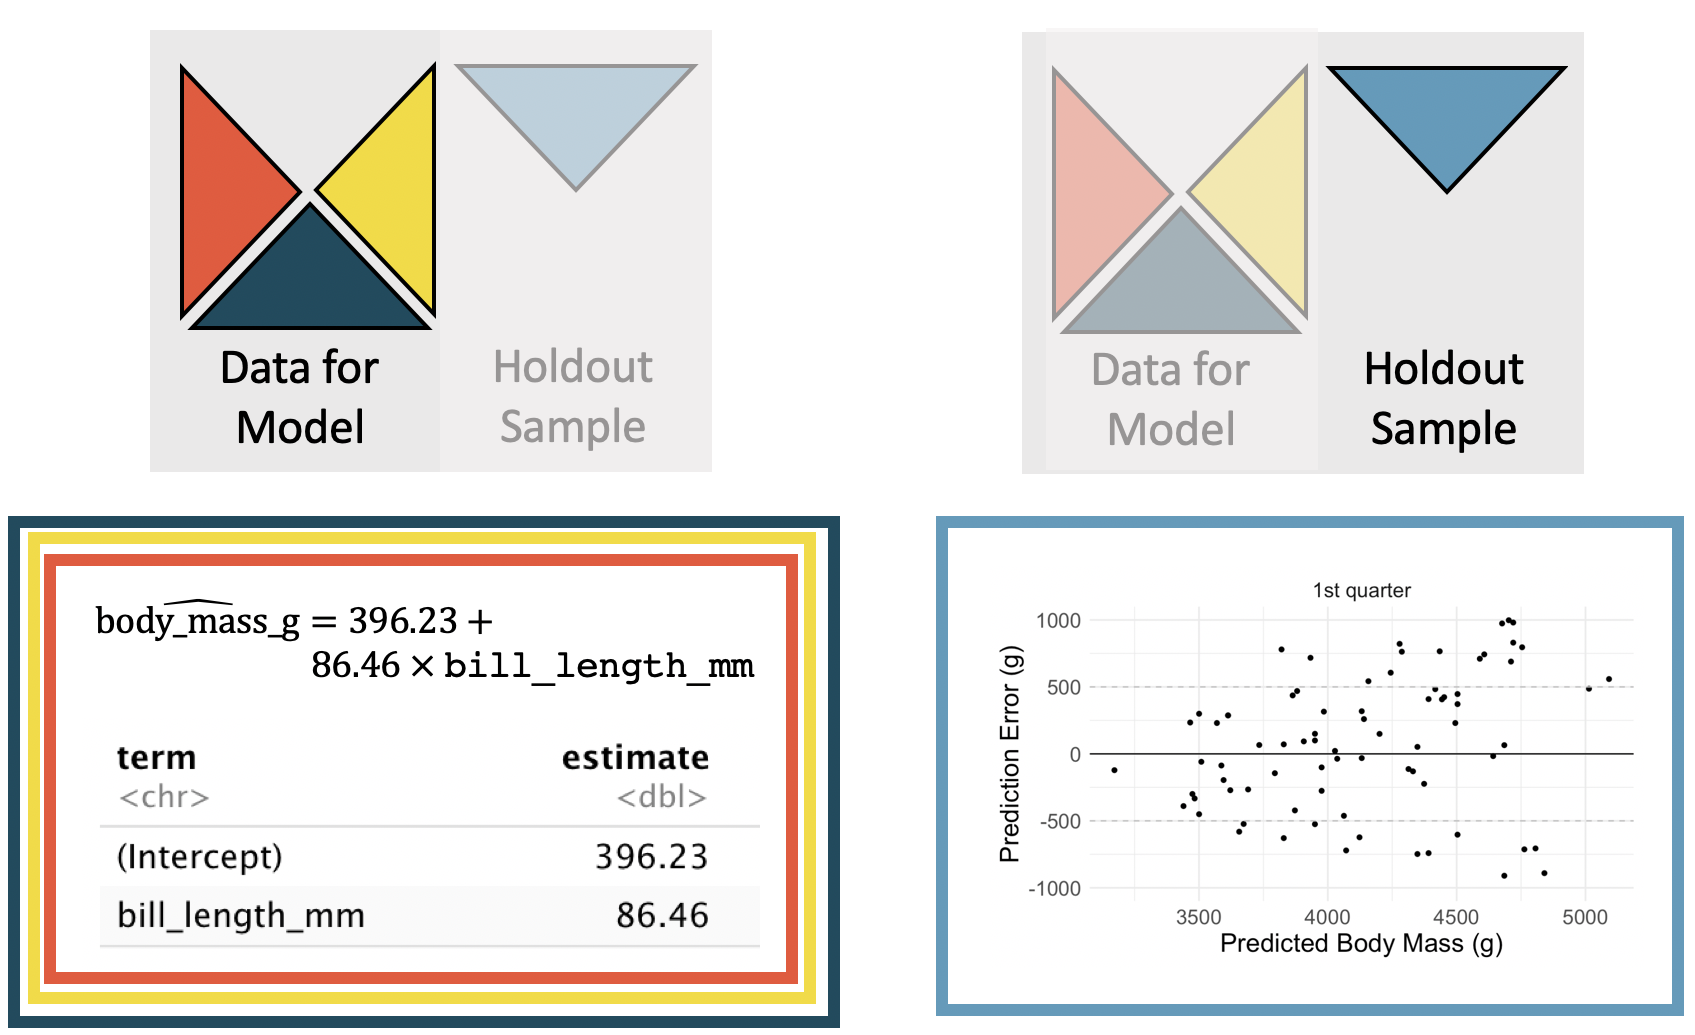 The left panel shows the linear model predicting body mass in grams using bill length in mm; the model was built using the red, green, and yellow triangular sections of the observed data.  The right panel shows a scatterplot of the prediction error versus the fitted values for the set of observations in the blue triangular section of the observed data. The prediction errors range from roughly -1000 grams to +1000 grams.